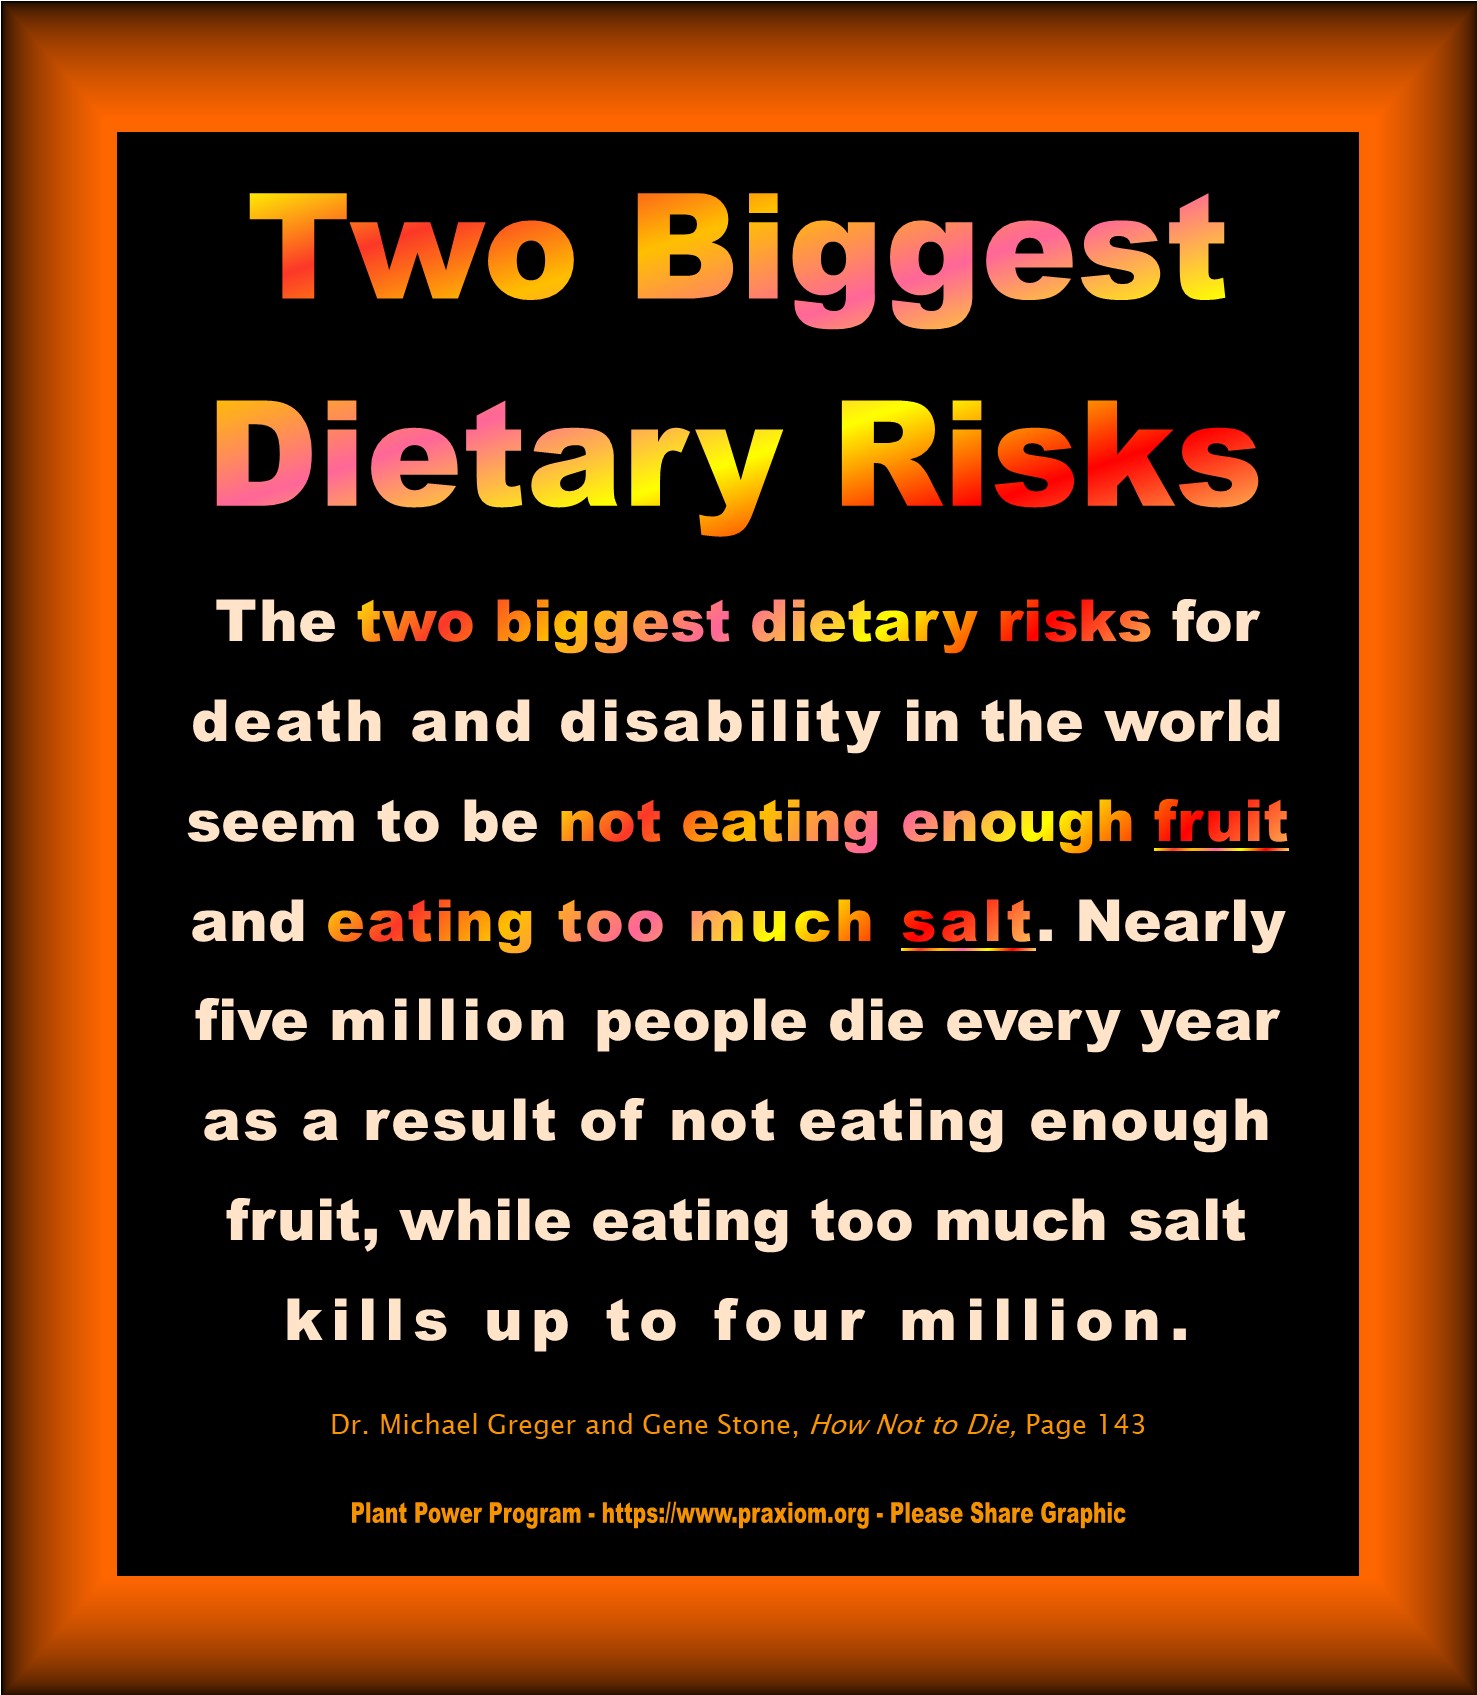 Two Biggest Dietary Risks - Dr. Michael Greger